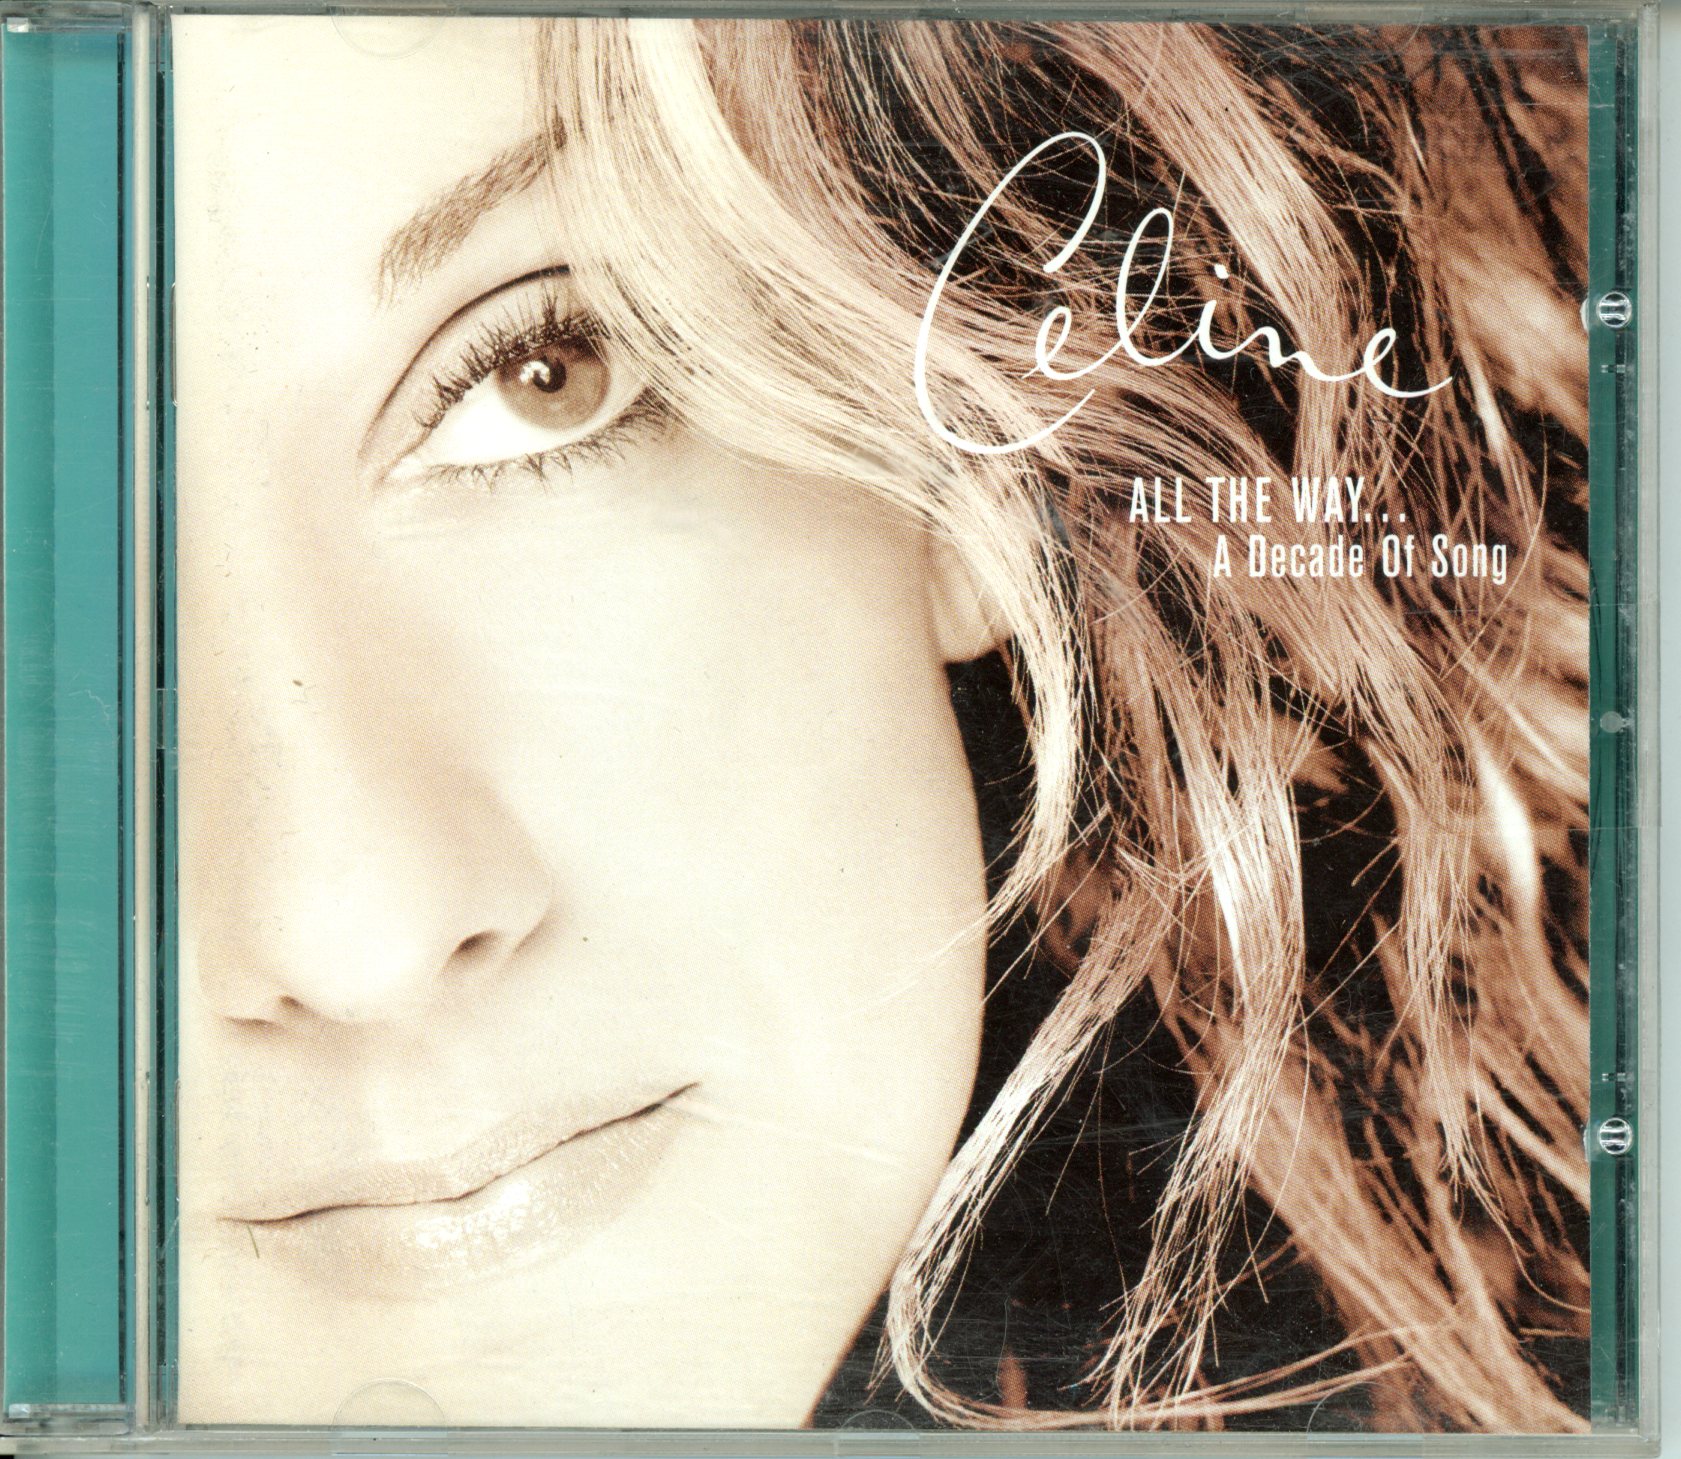 CÉLINE DION ALL THE WAY A DECADE OF SONG